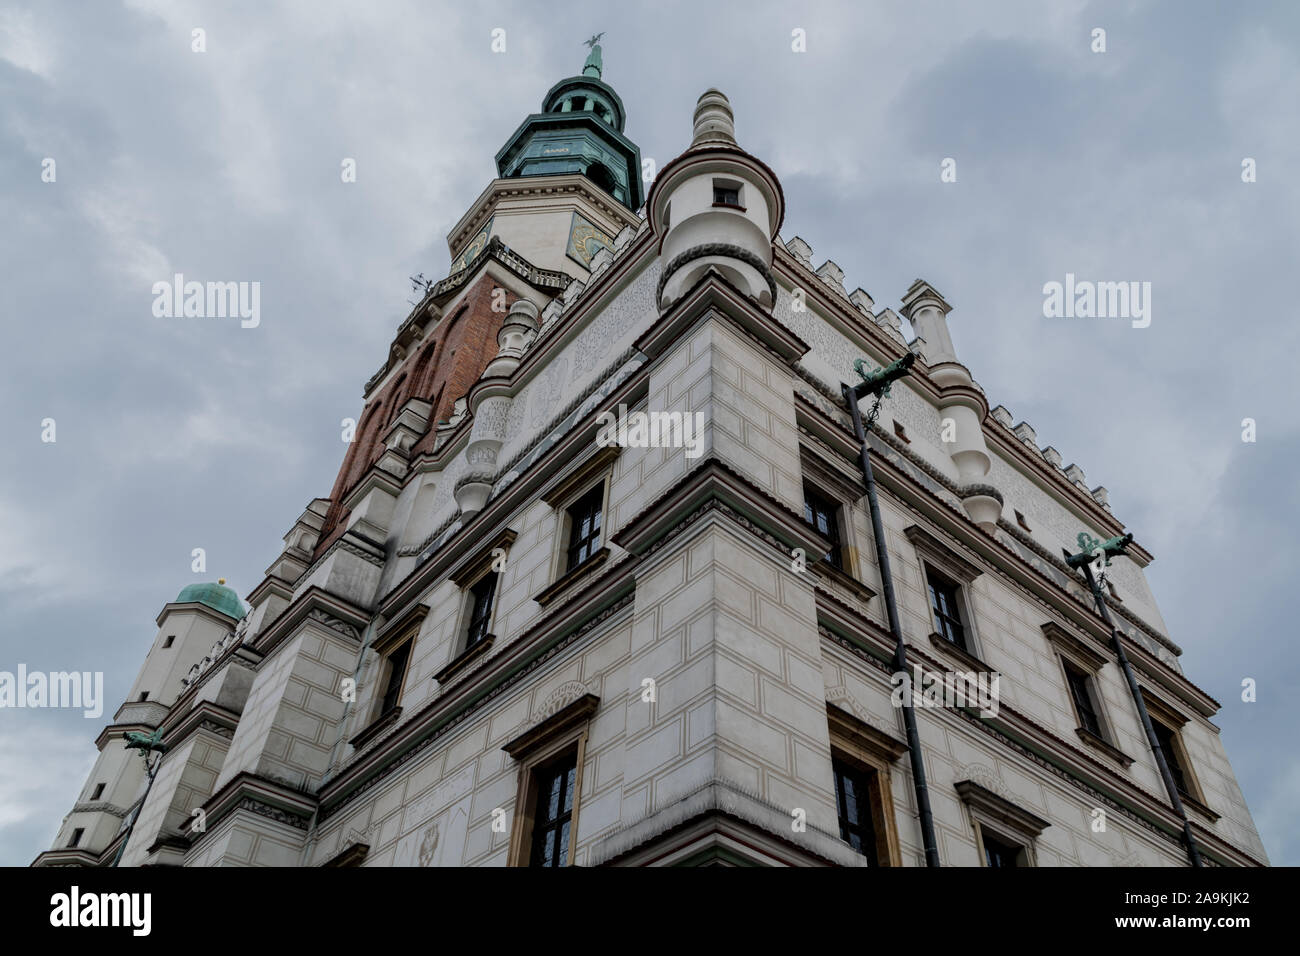 The Old Town Hall / Ratusz in Market Square, Poznan Stock Photo